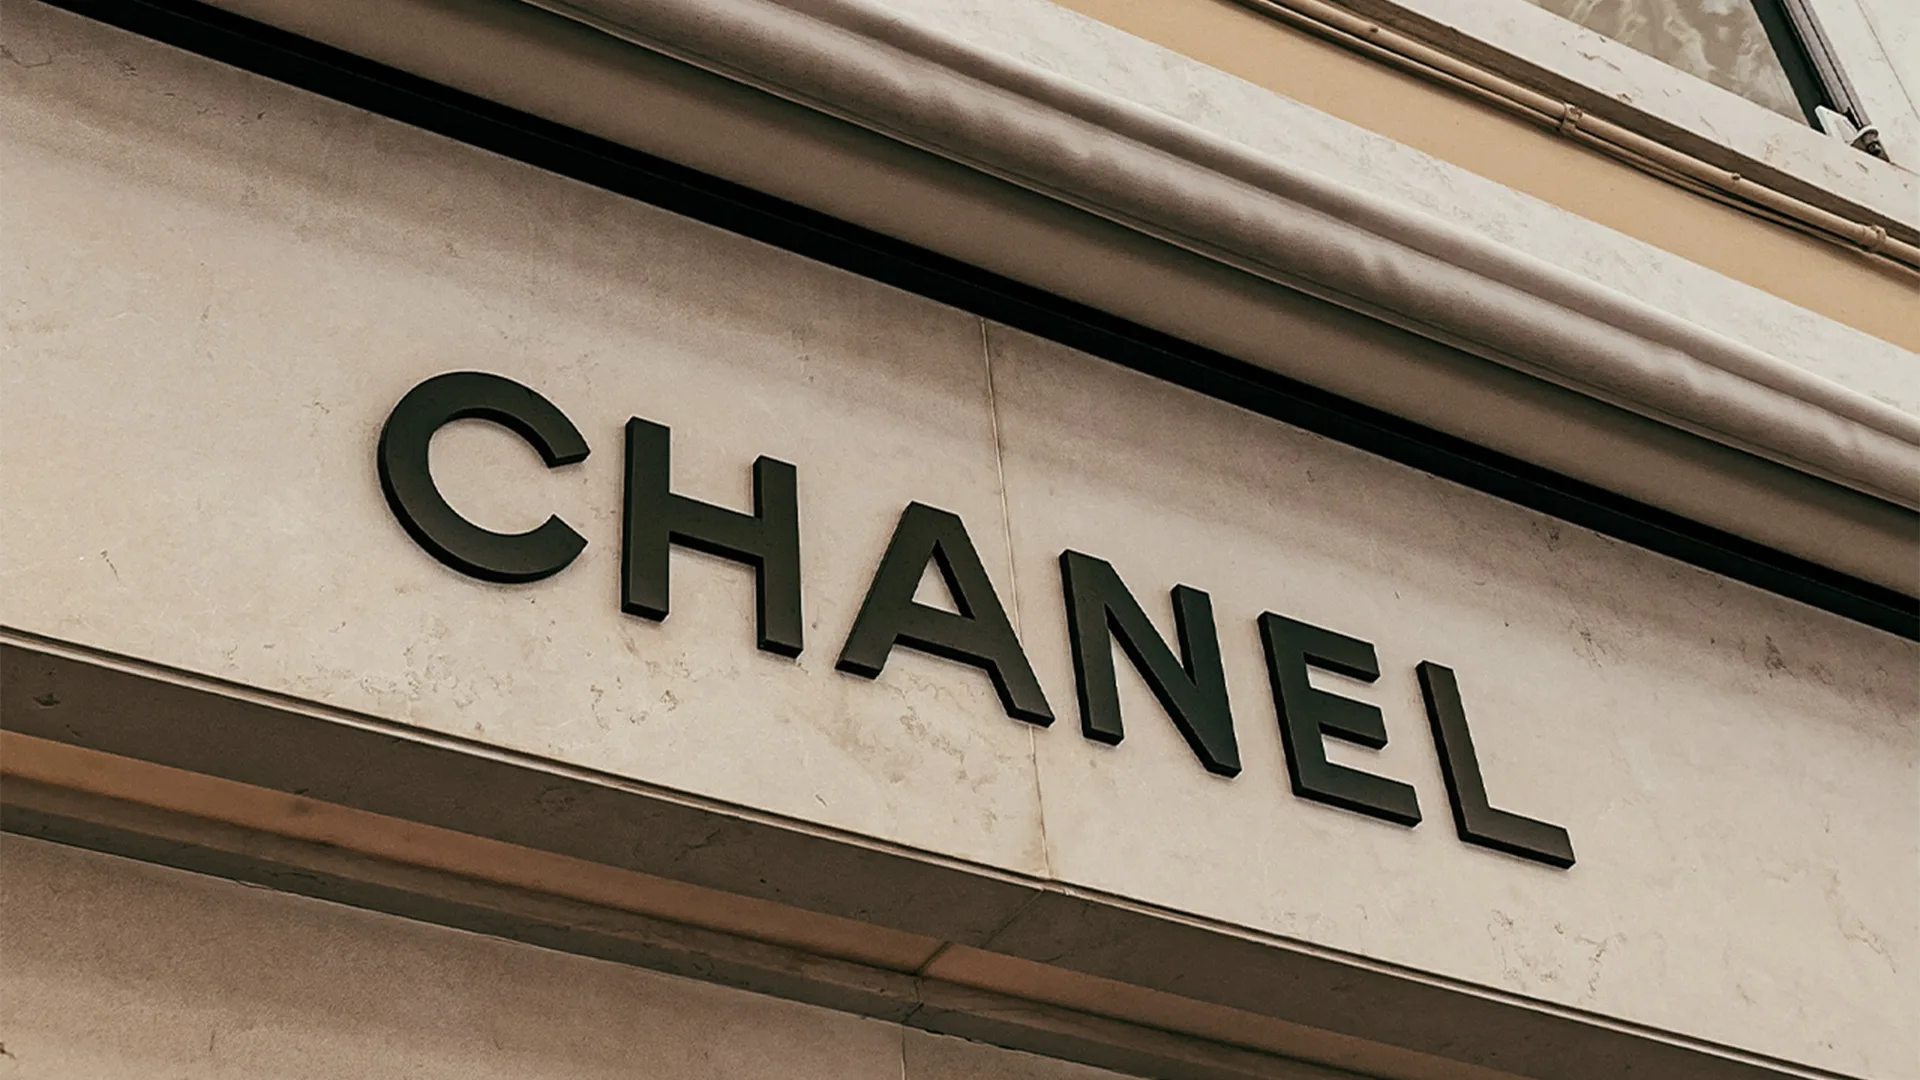 The outside of a Chanel shop